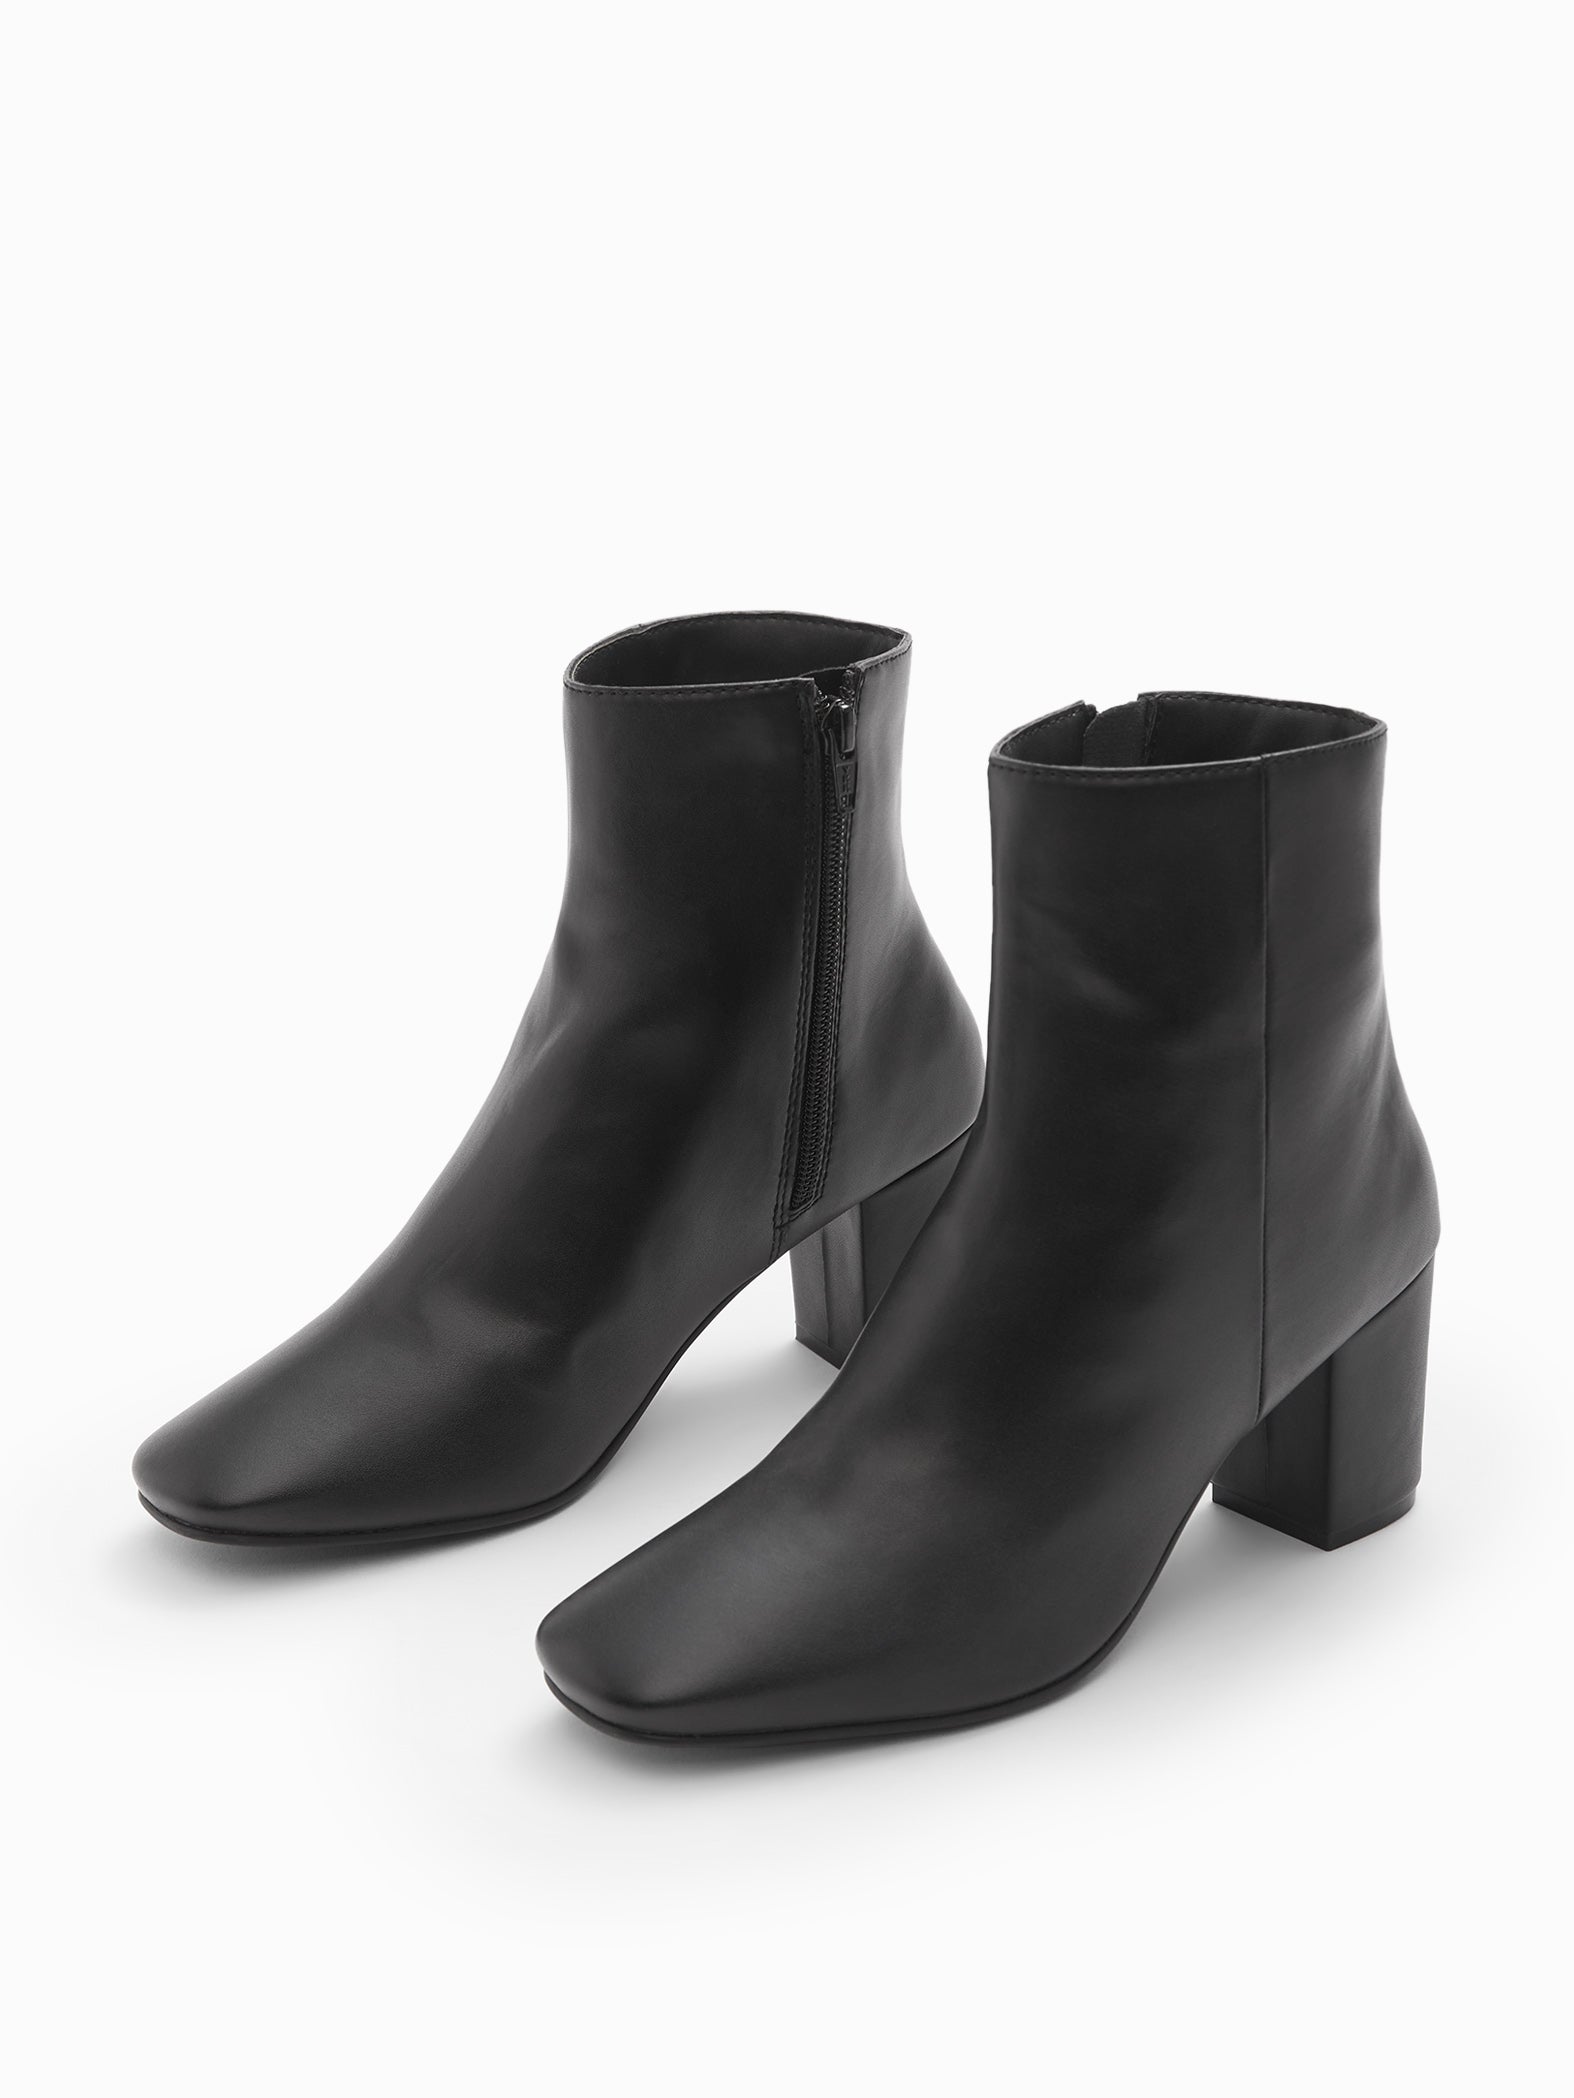 Black Patent Ankle Boots